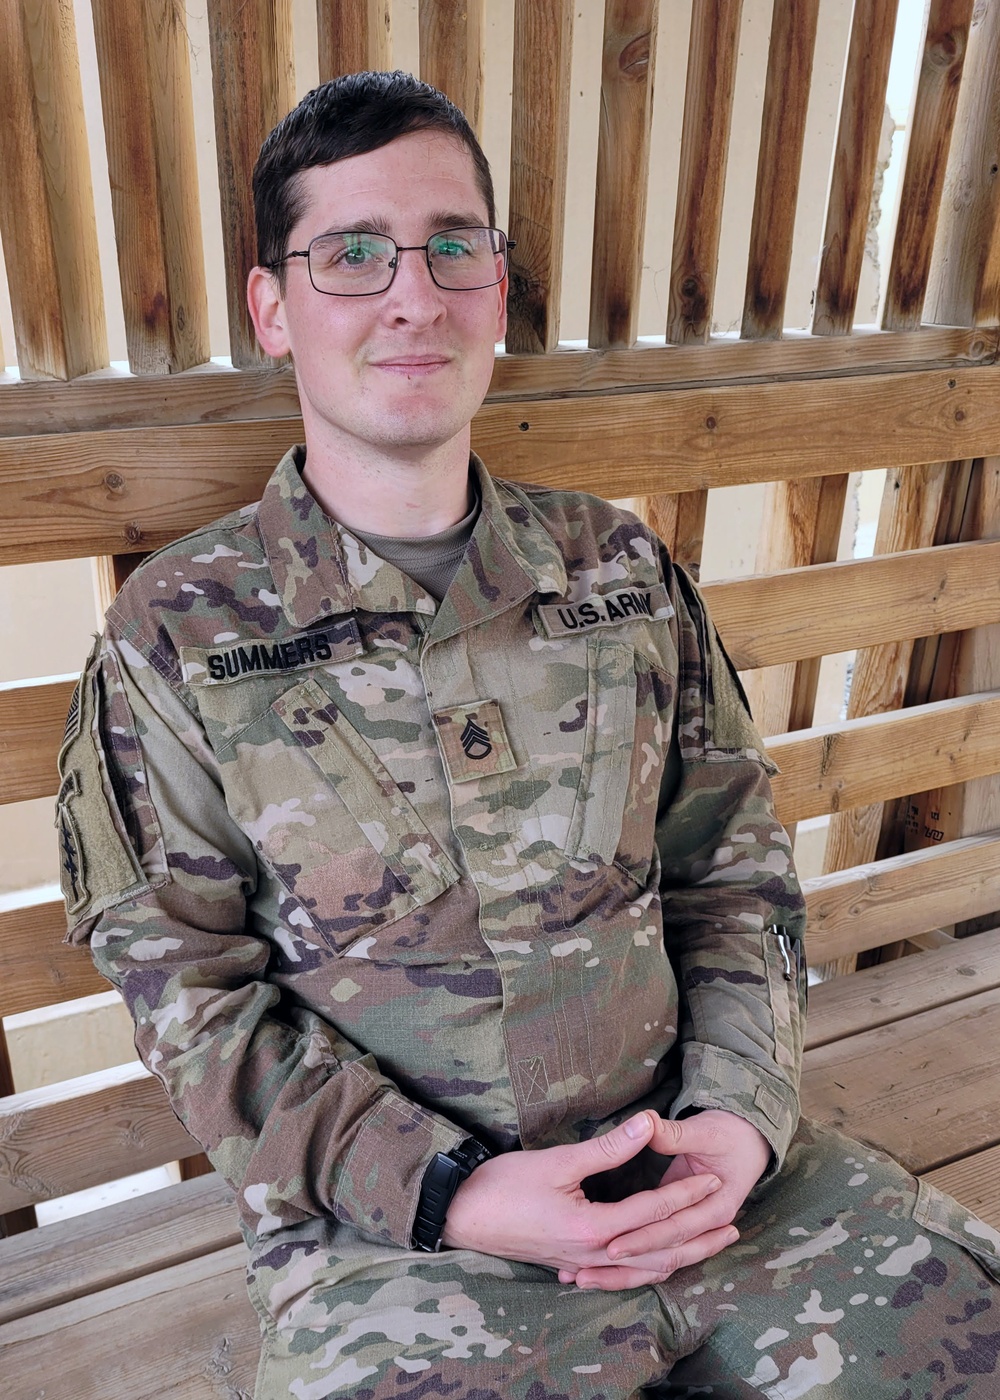 AMCOM employee serves in dual intel role as Soldier, civilian